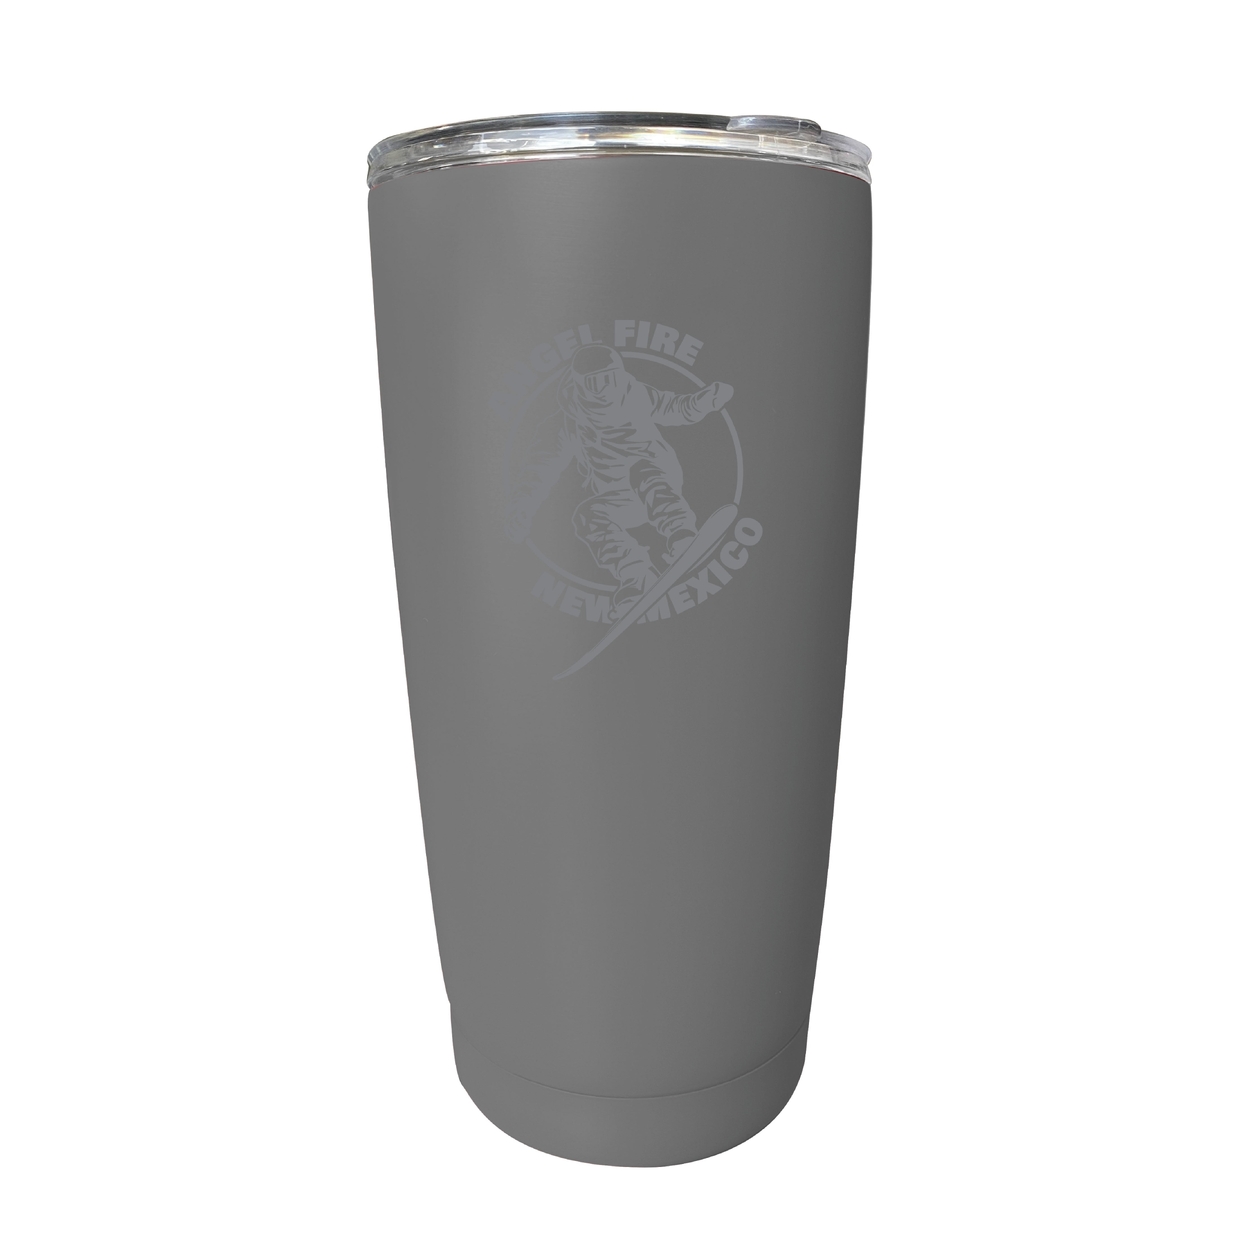 Angel Fire New Mexico Souvenir 16 Oz Engraved Stainless Steel Insulated Tumbler - Gray,,Single Unit